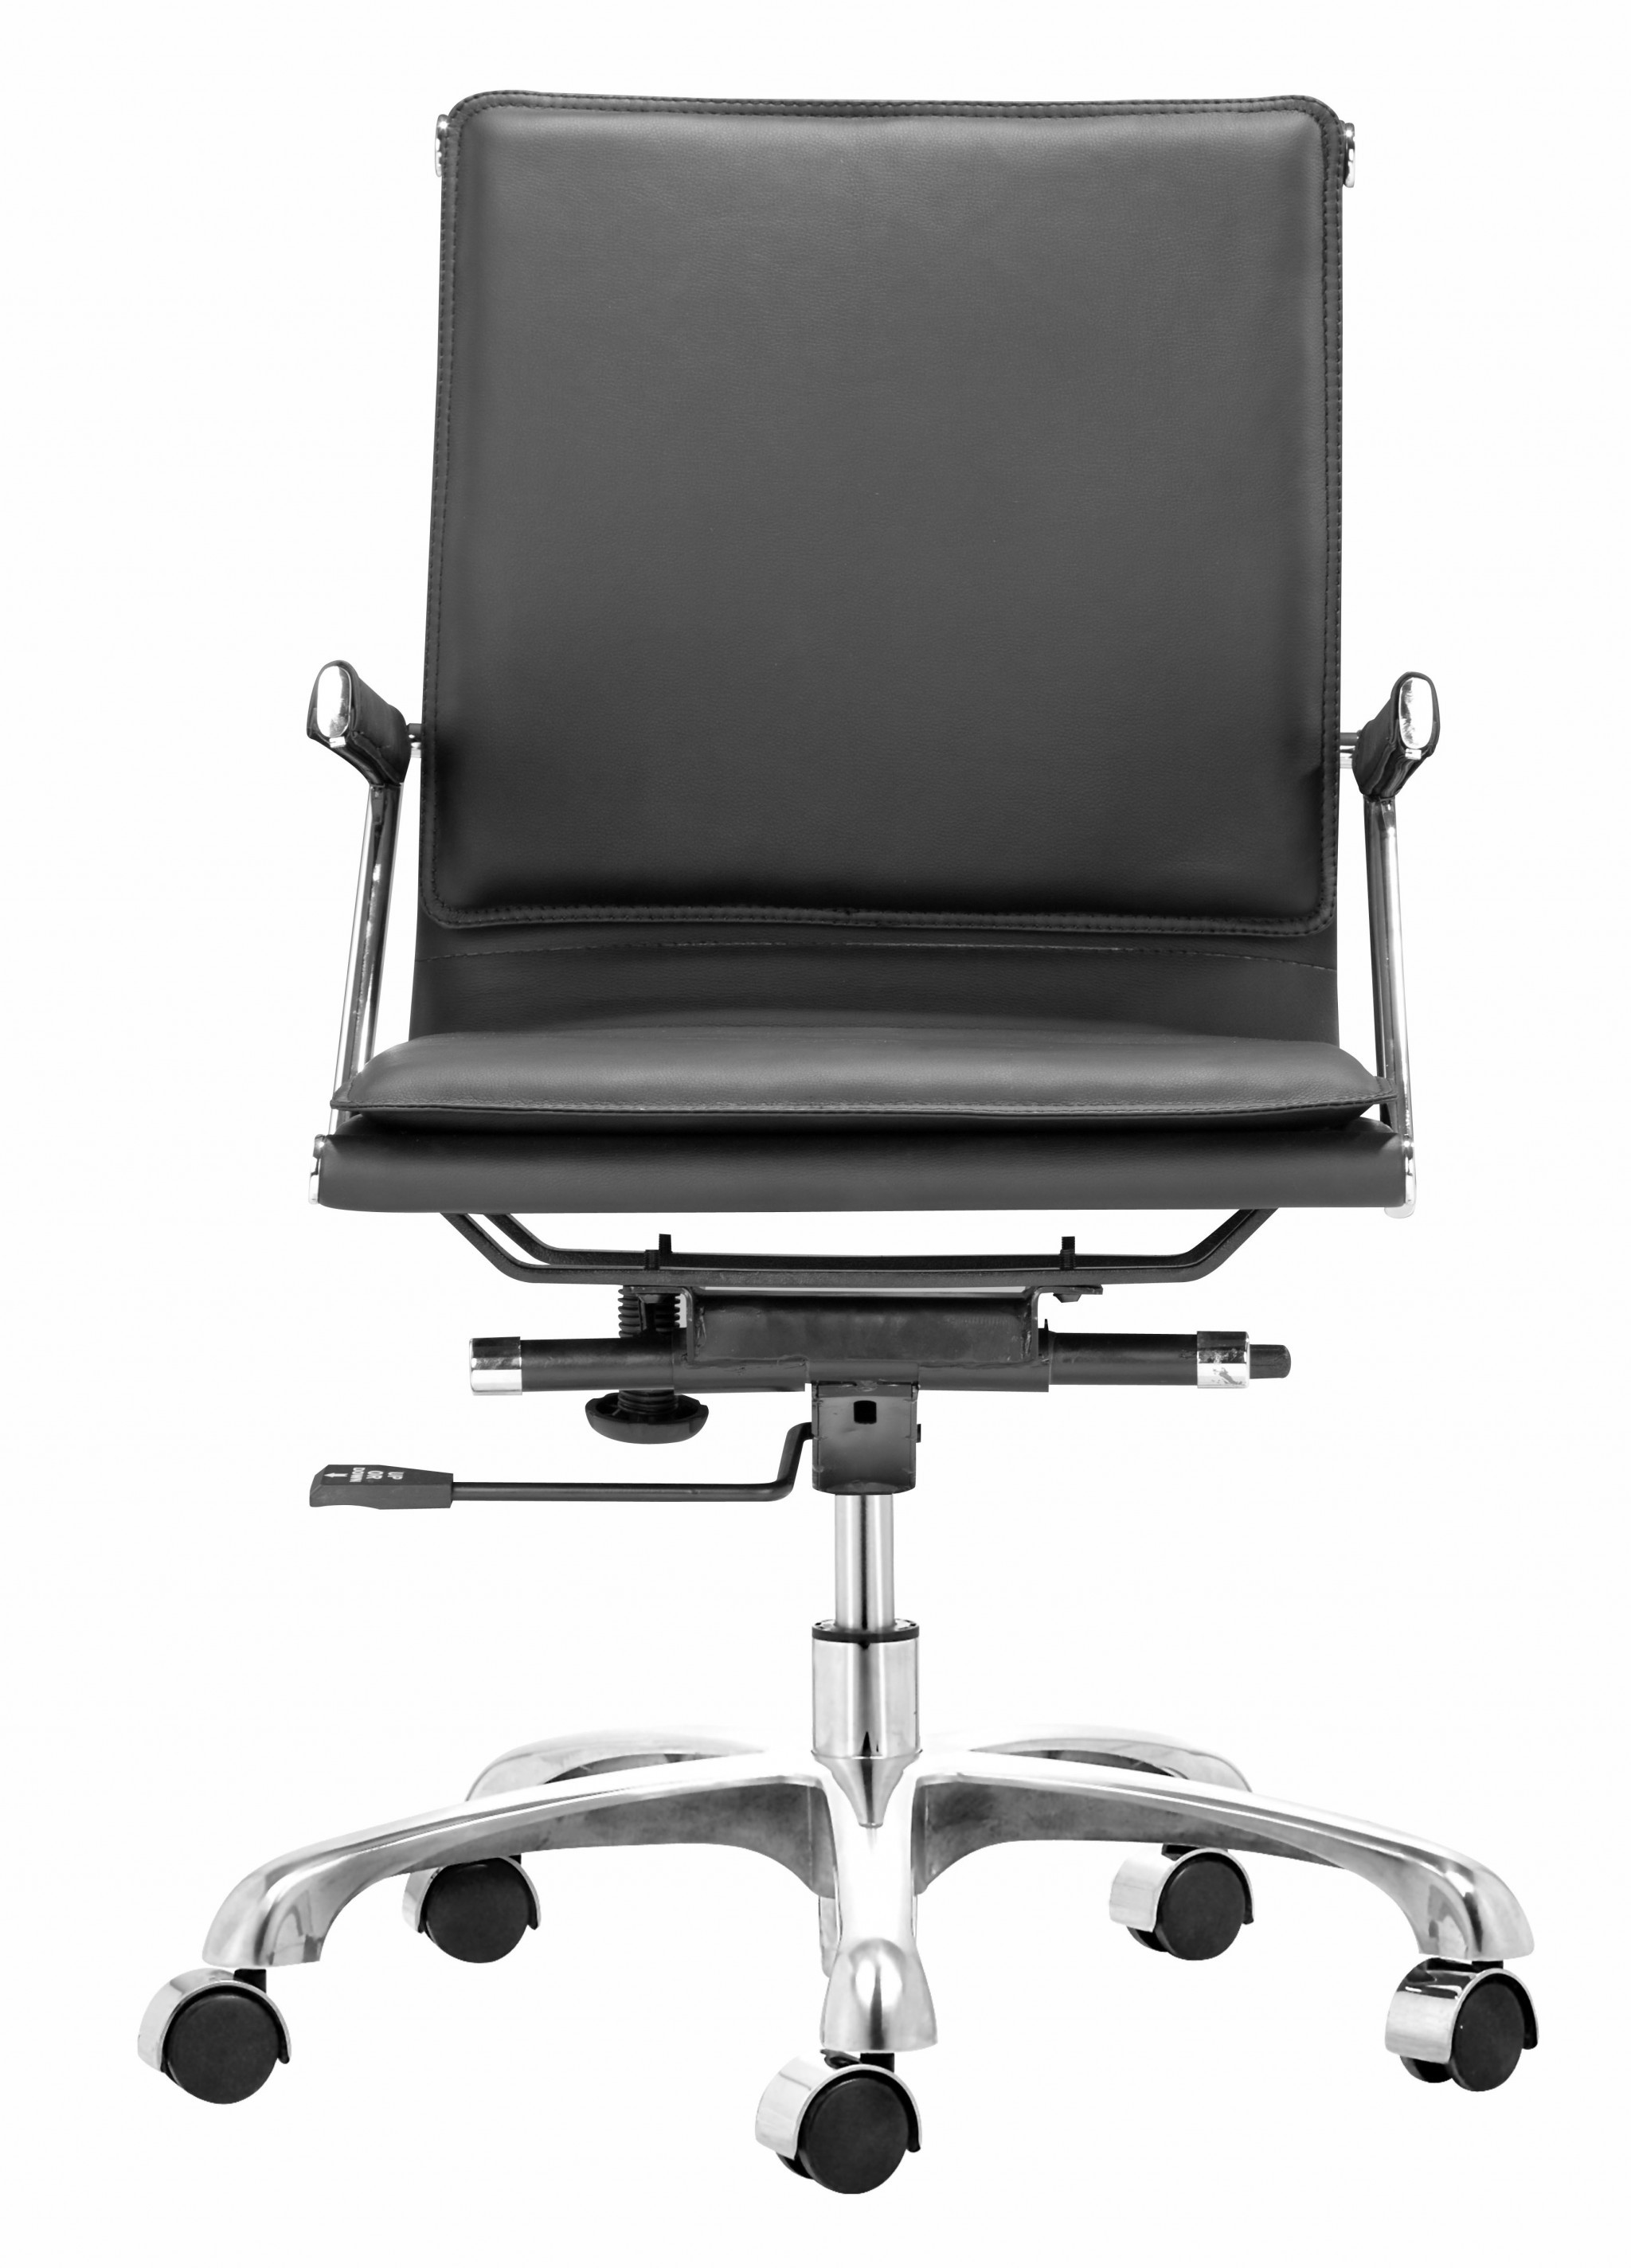 Black Faux Leather Executive Rolling Office Chair